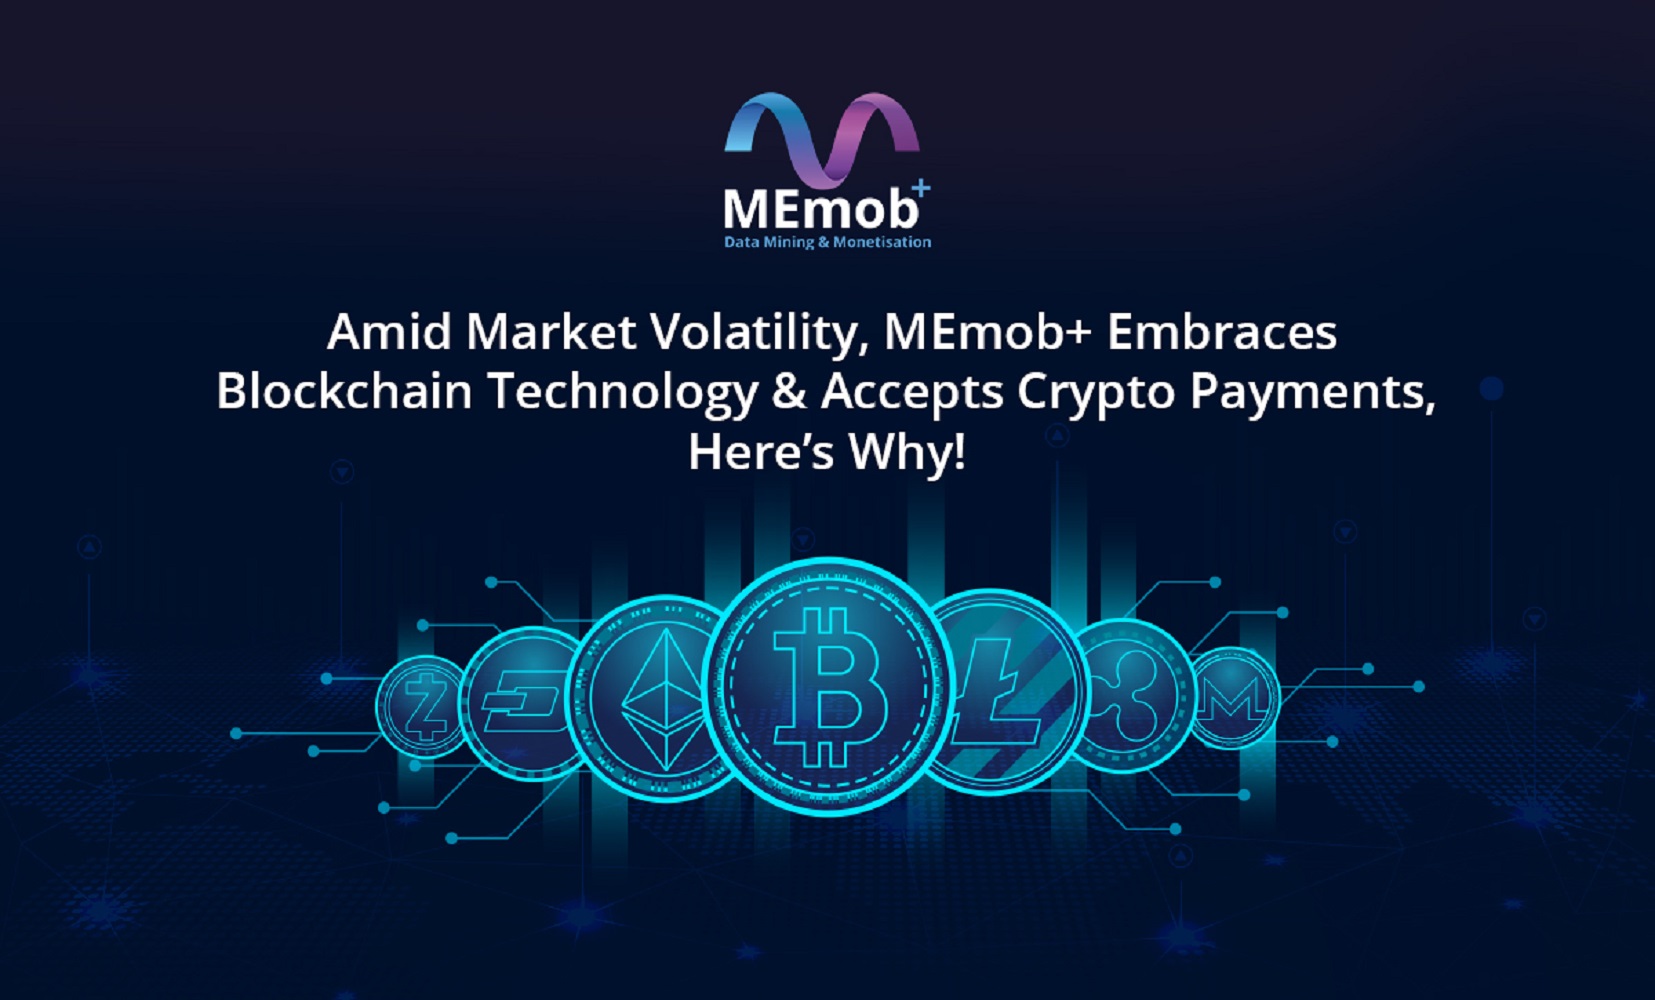 Amid Market Volatility, MEmob+ Embraces Blockchain Technology & Accepts Crypto Payments. Here’s Why!